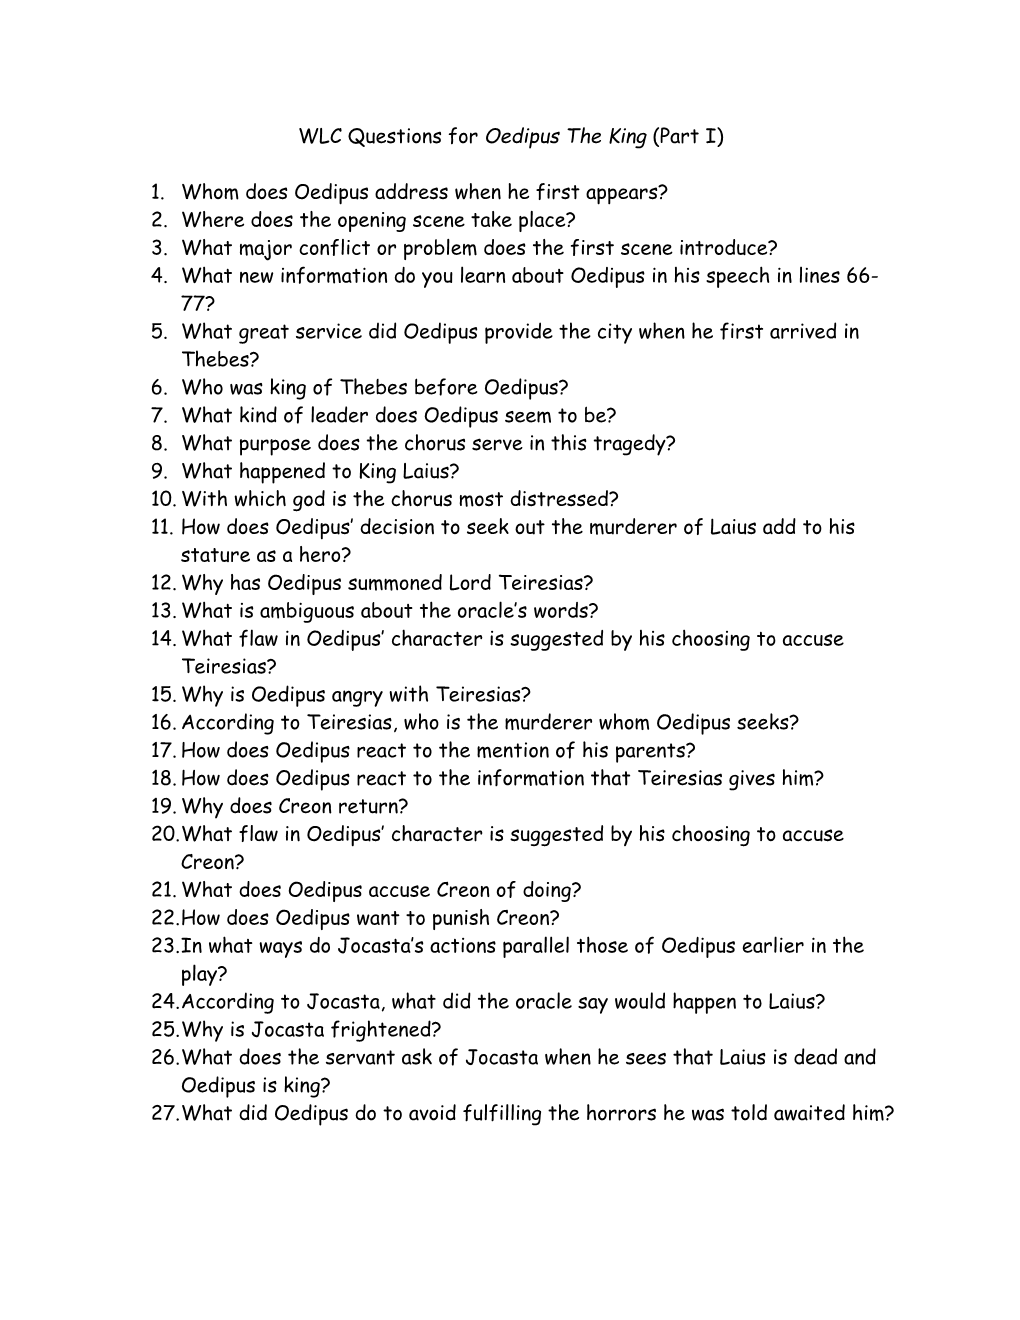 WLC Questions for Oedipus the King (Part I)